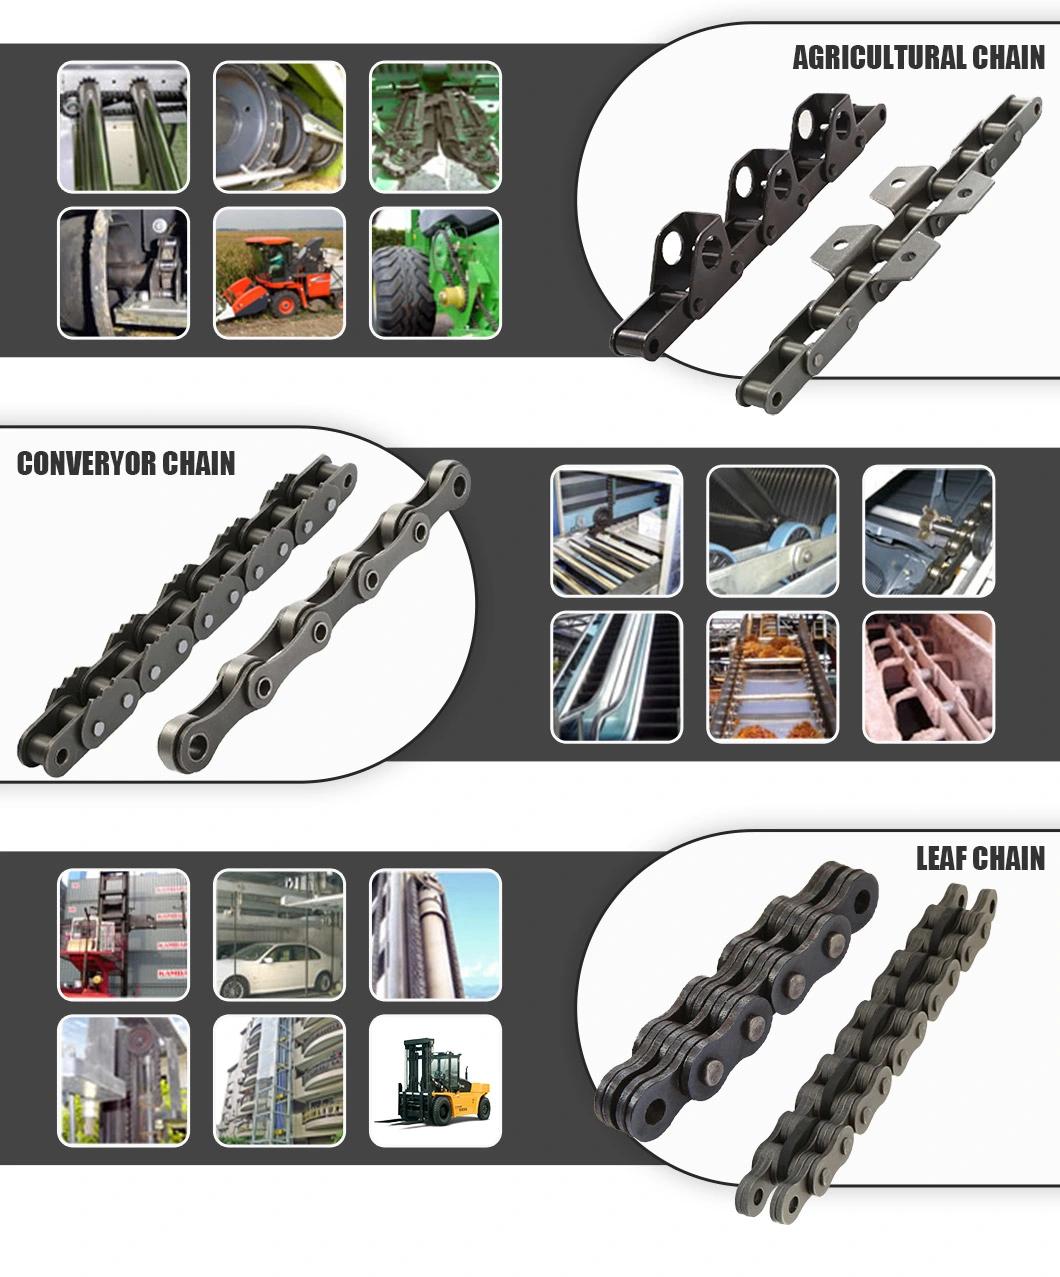 High Quality Transmission Agricultural Chain Ca627-Cpef7